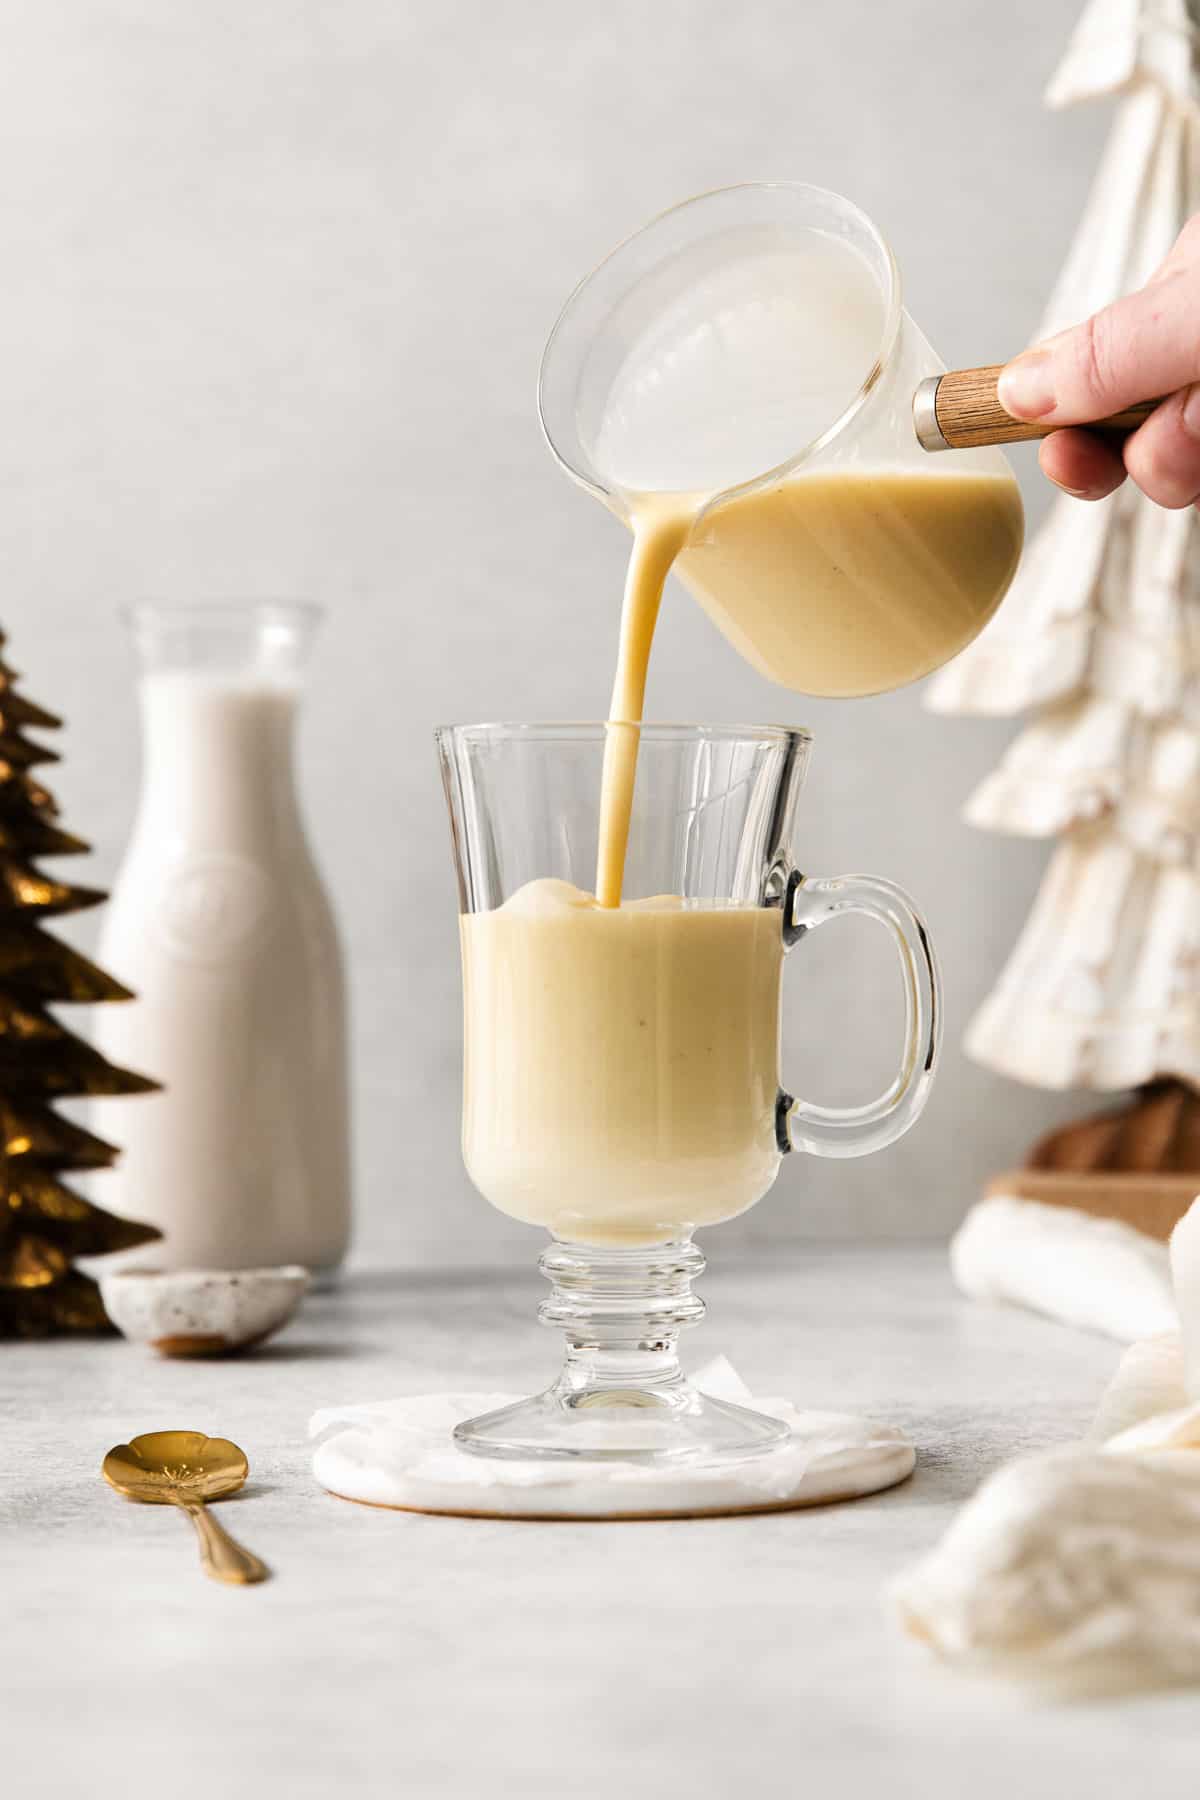 Egg nog being poured in a glass